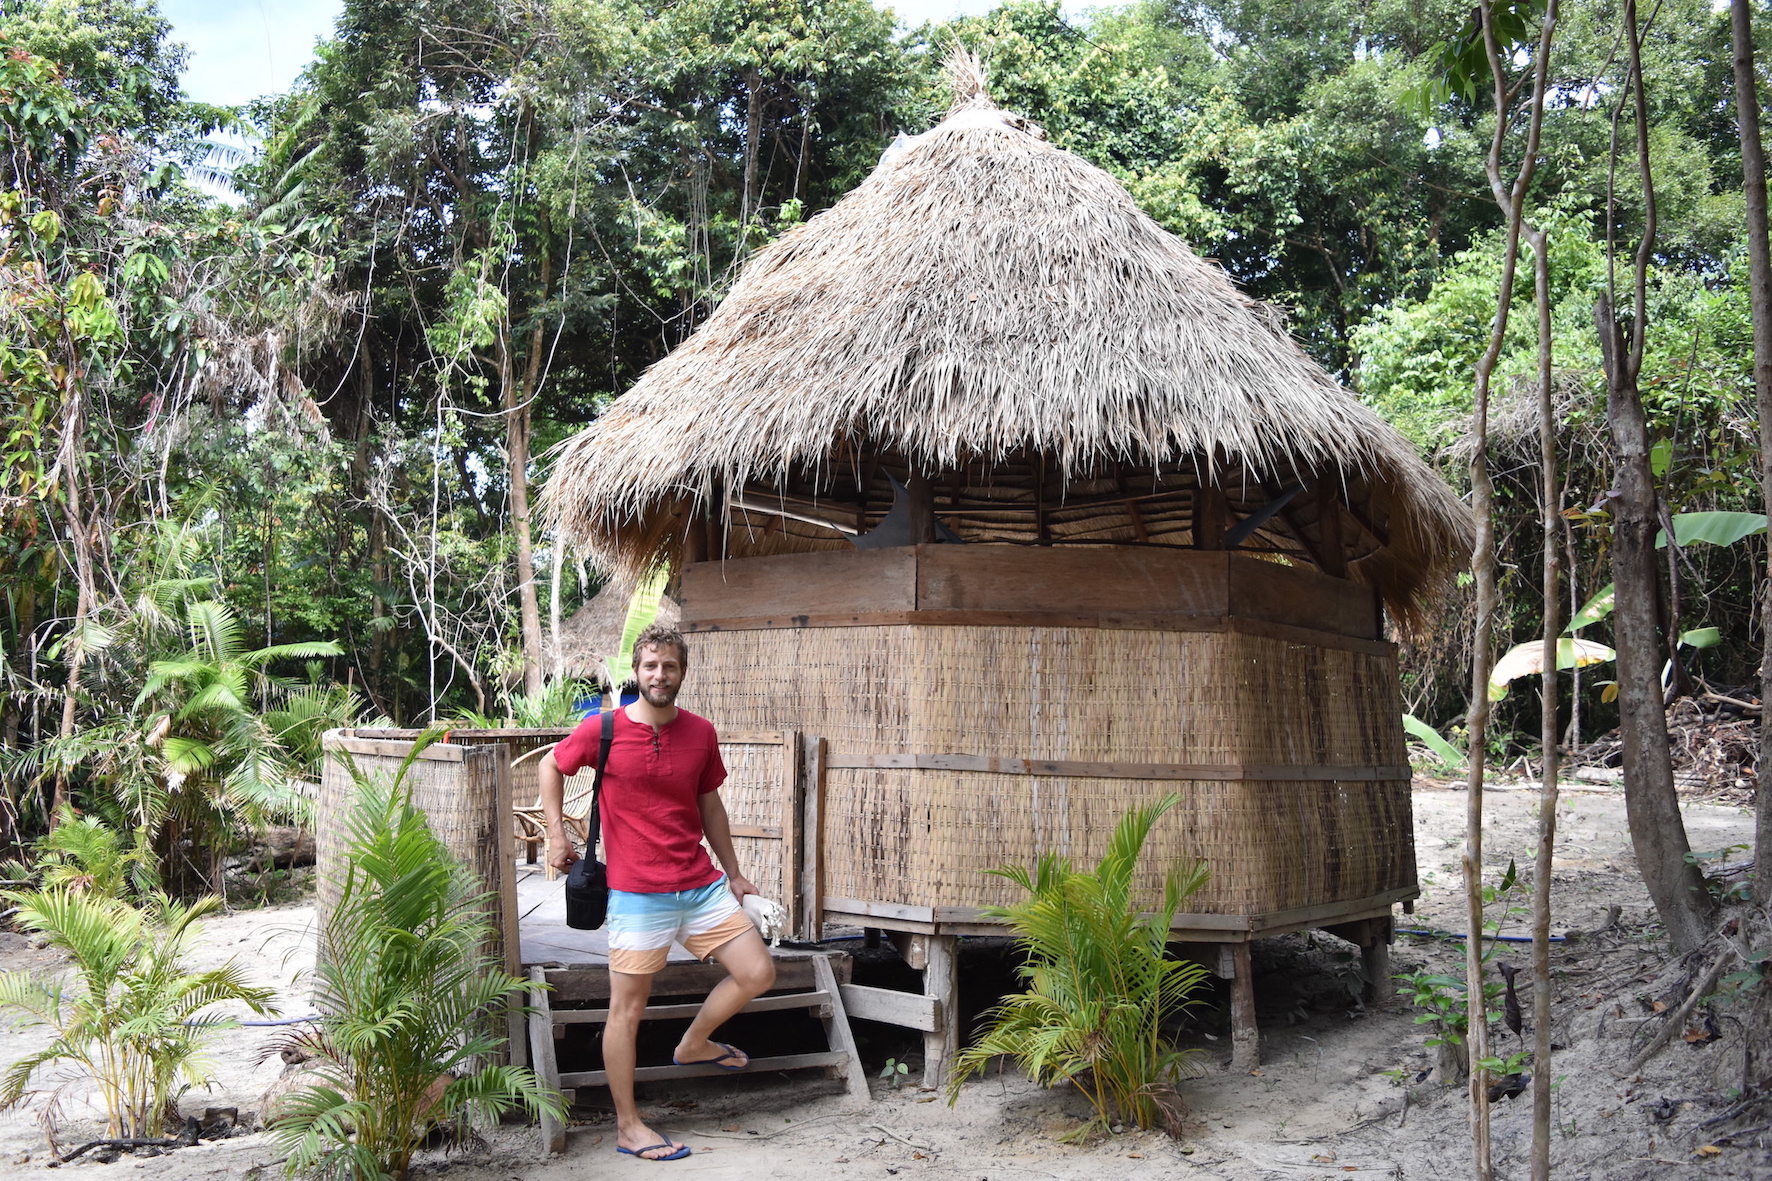 Enrico standing in front of a bamboo hut at Koh Ta Kiev